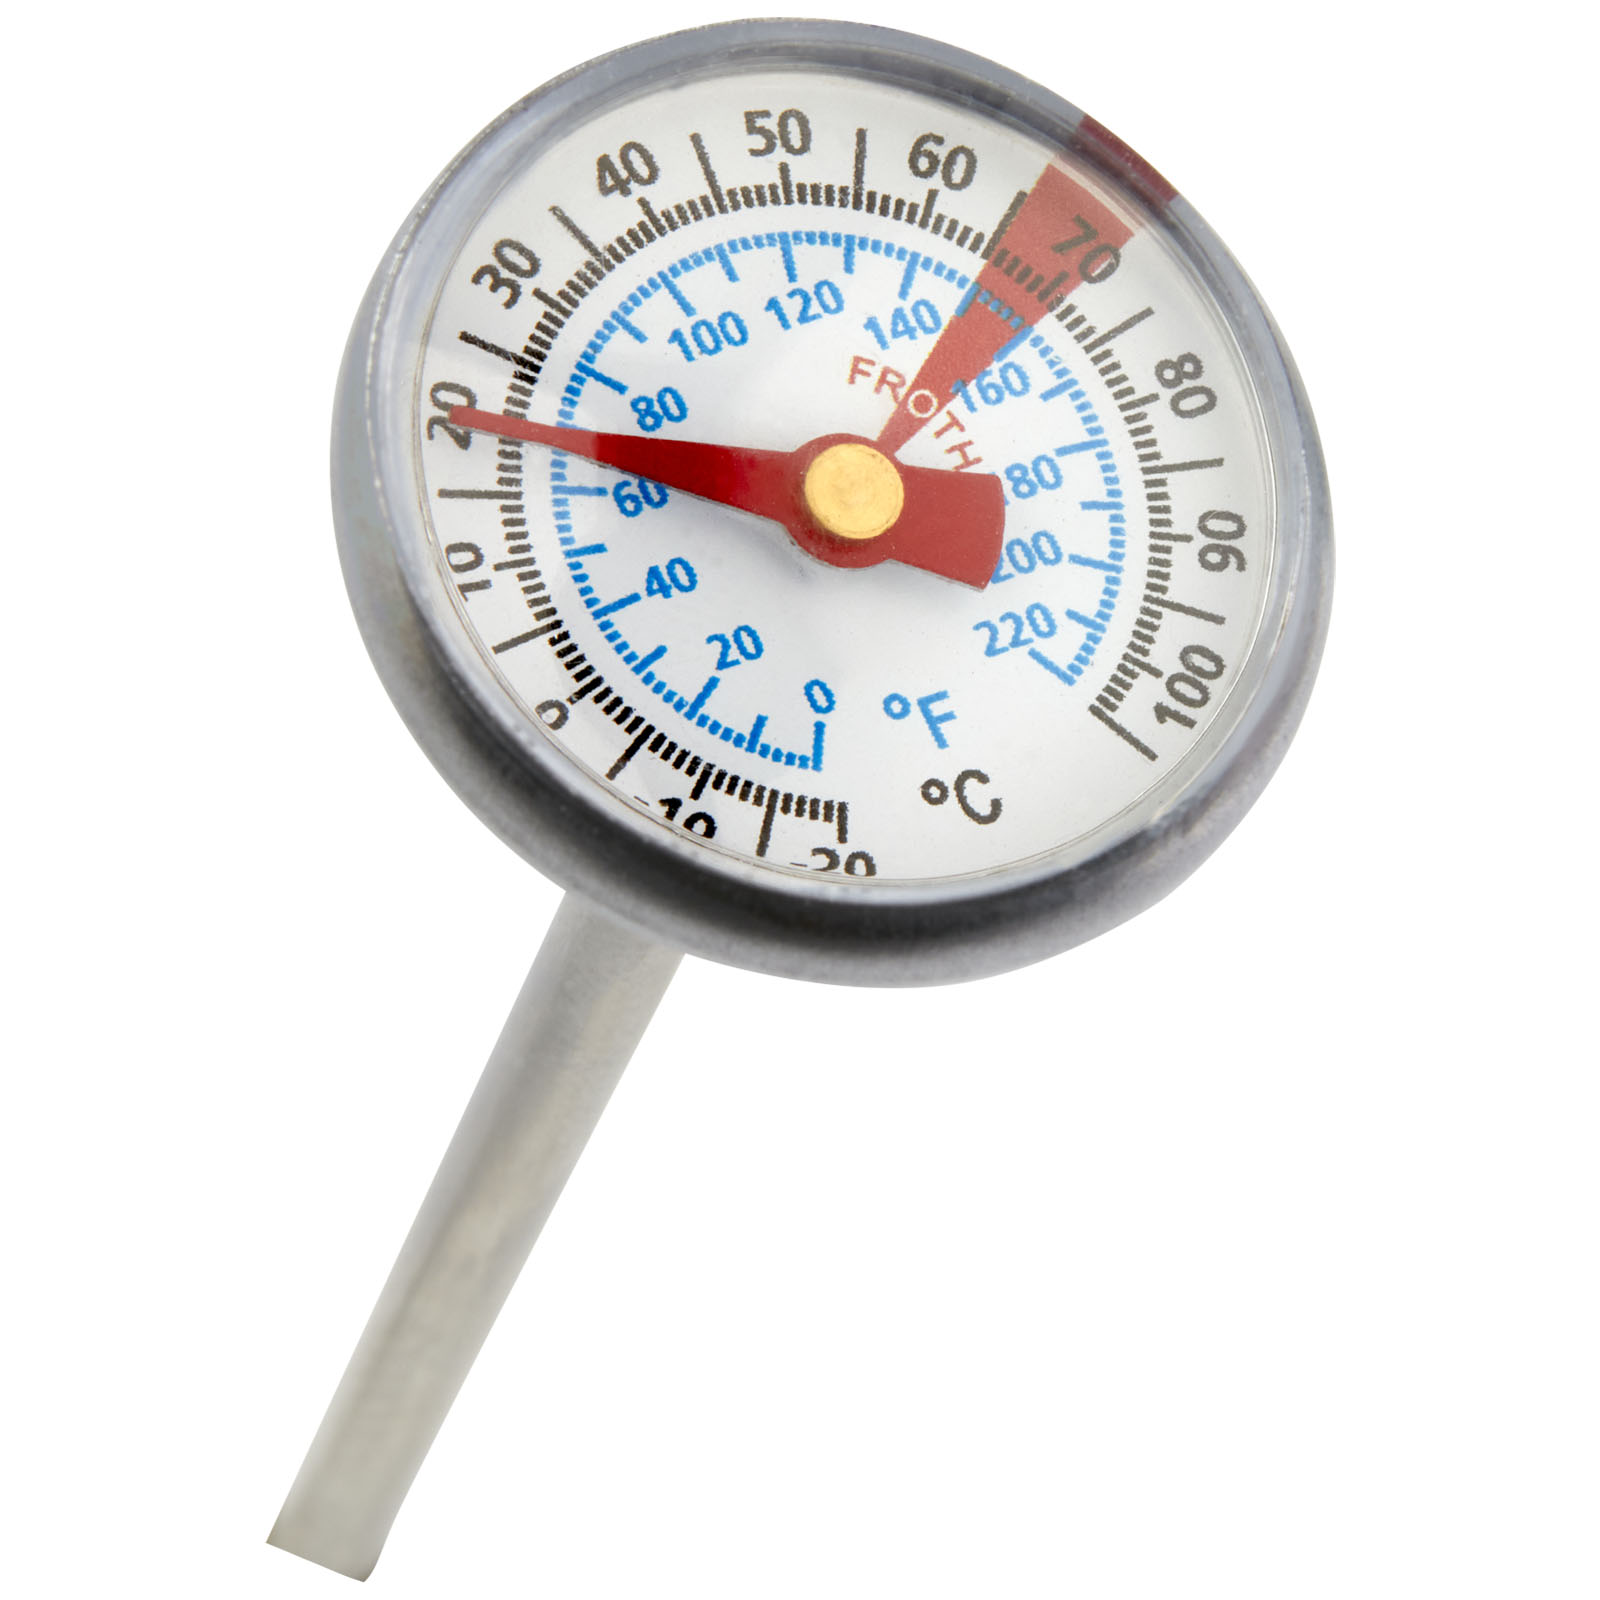 Advertising BBQ Accessories - Met BBQ thermomether - 2